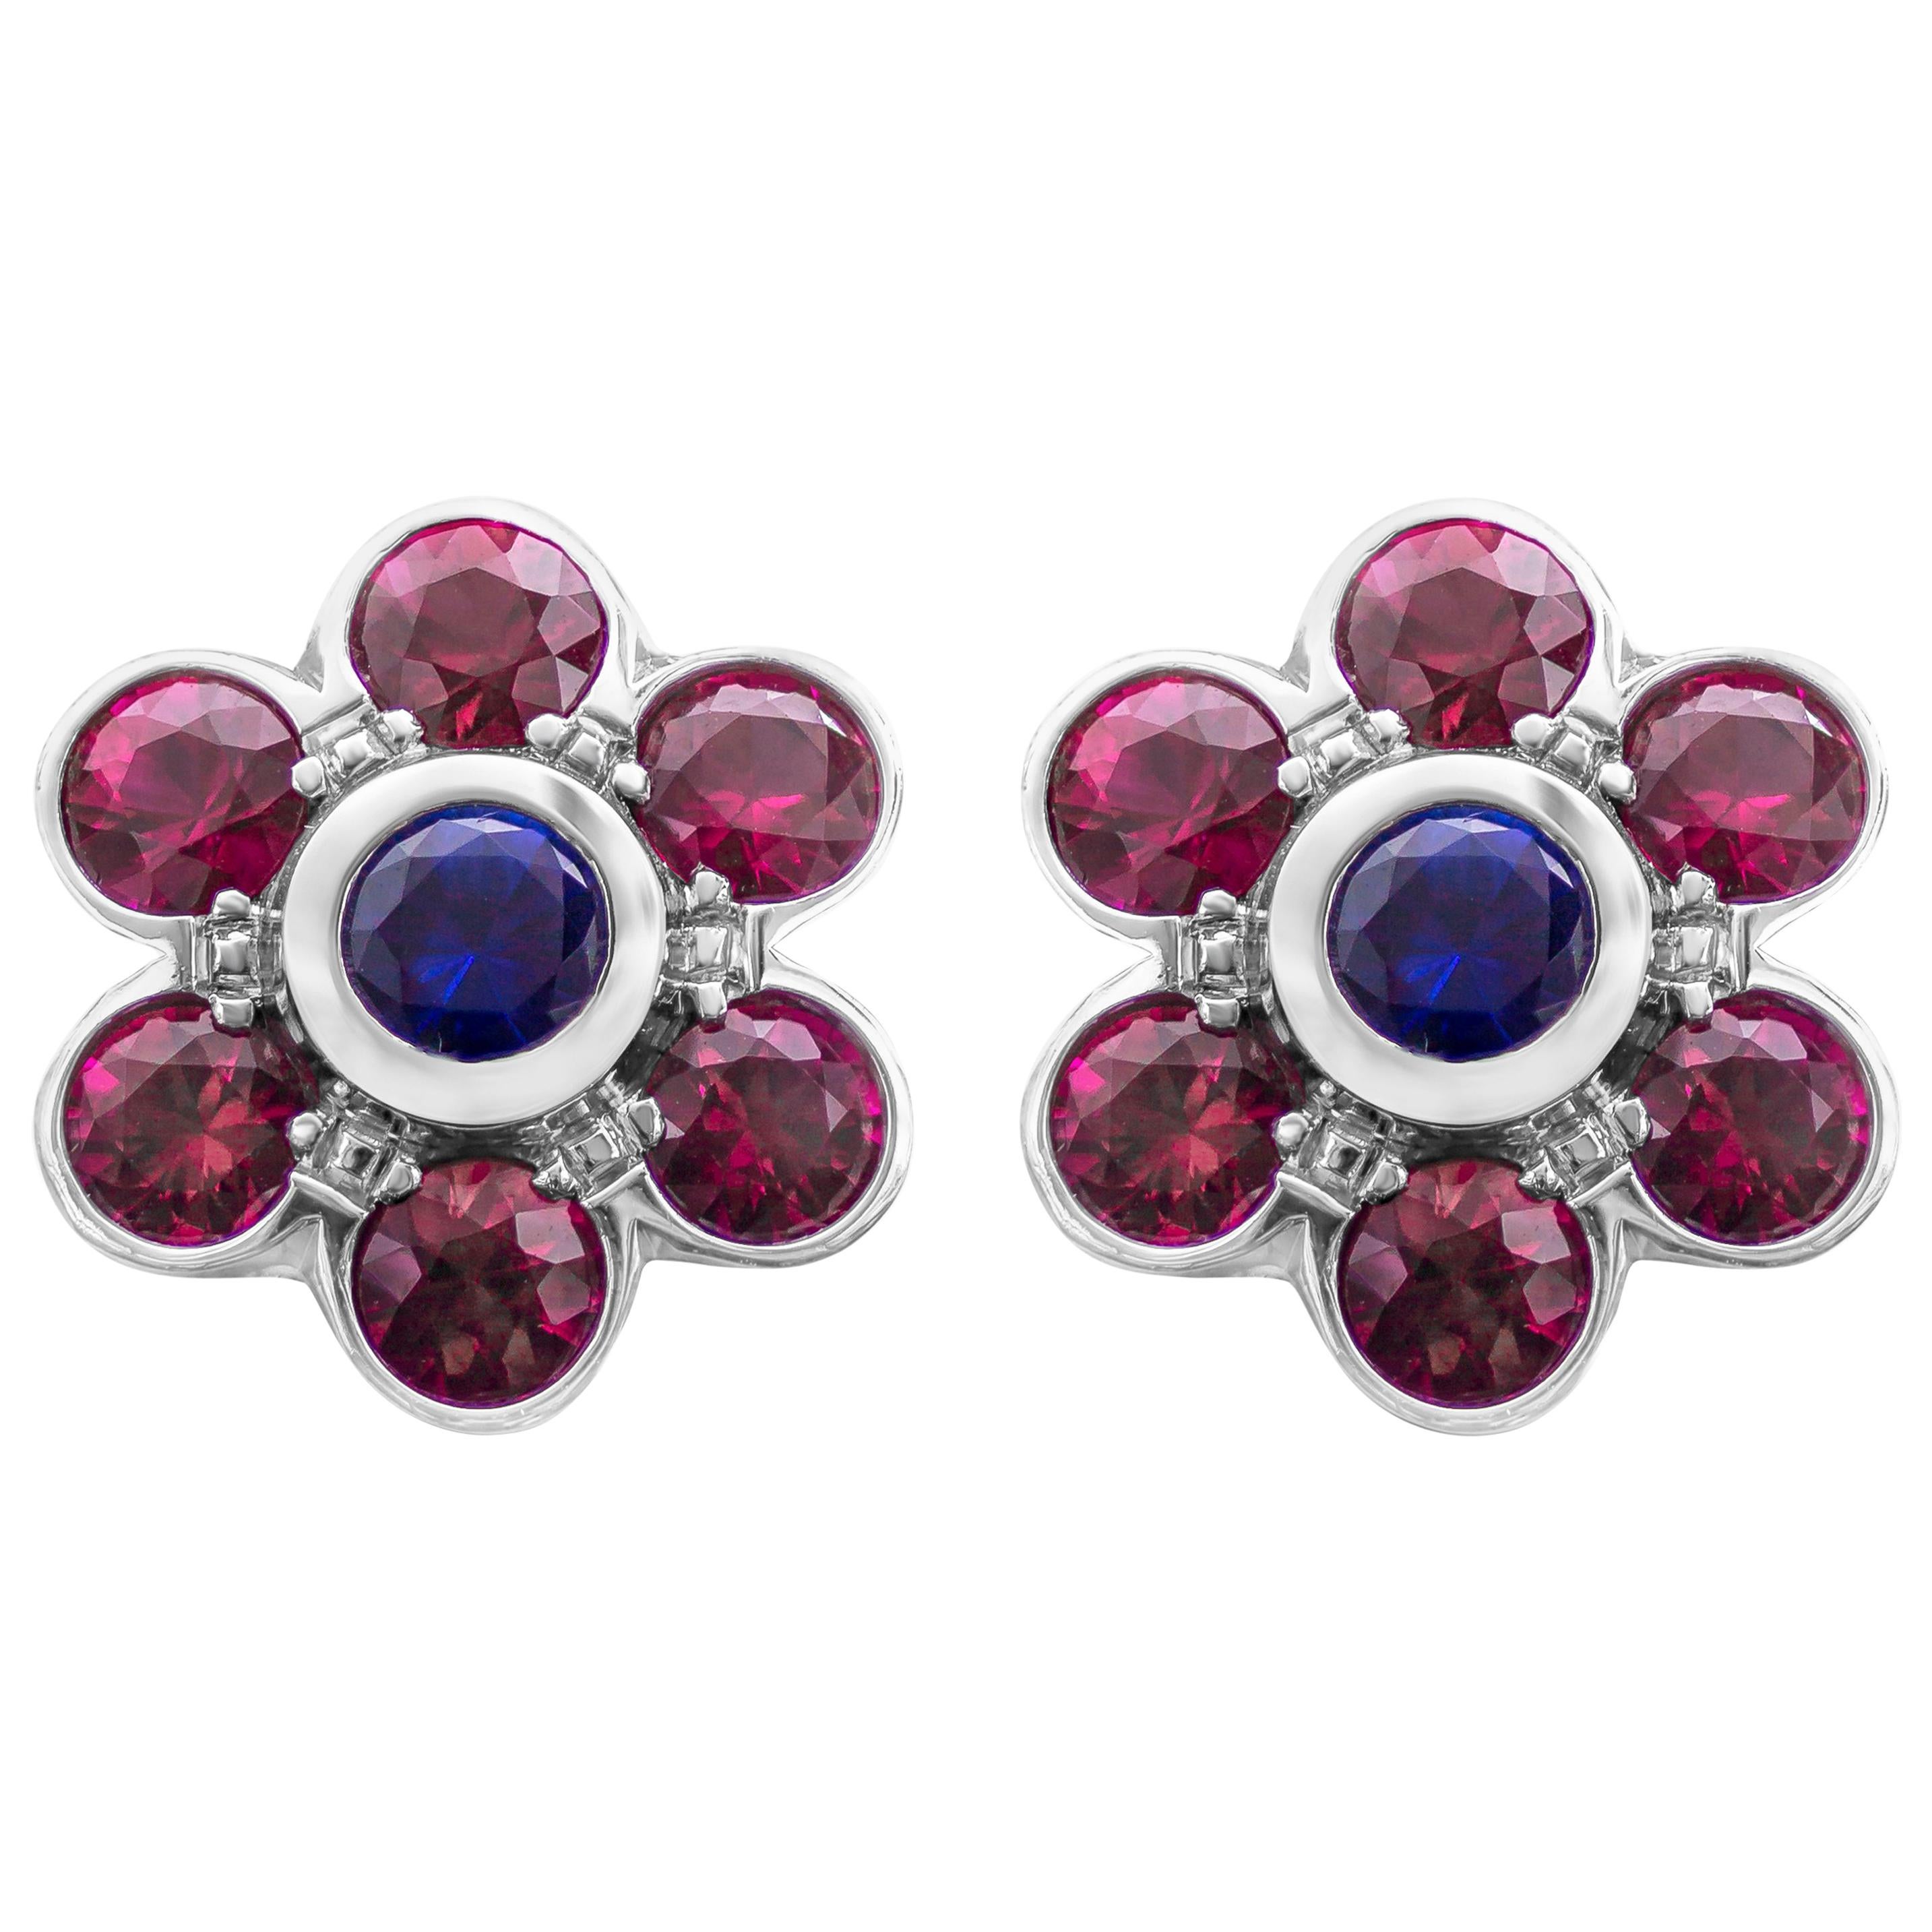 3.07 Carats Total Brilliant Round Cut Ruby and Sapphire Flower Stud Earrings